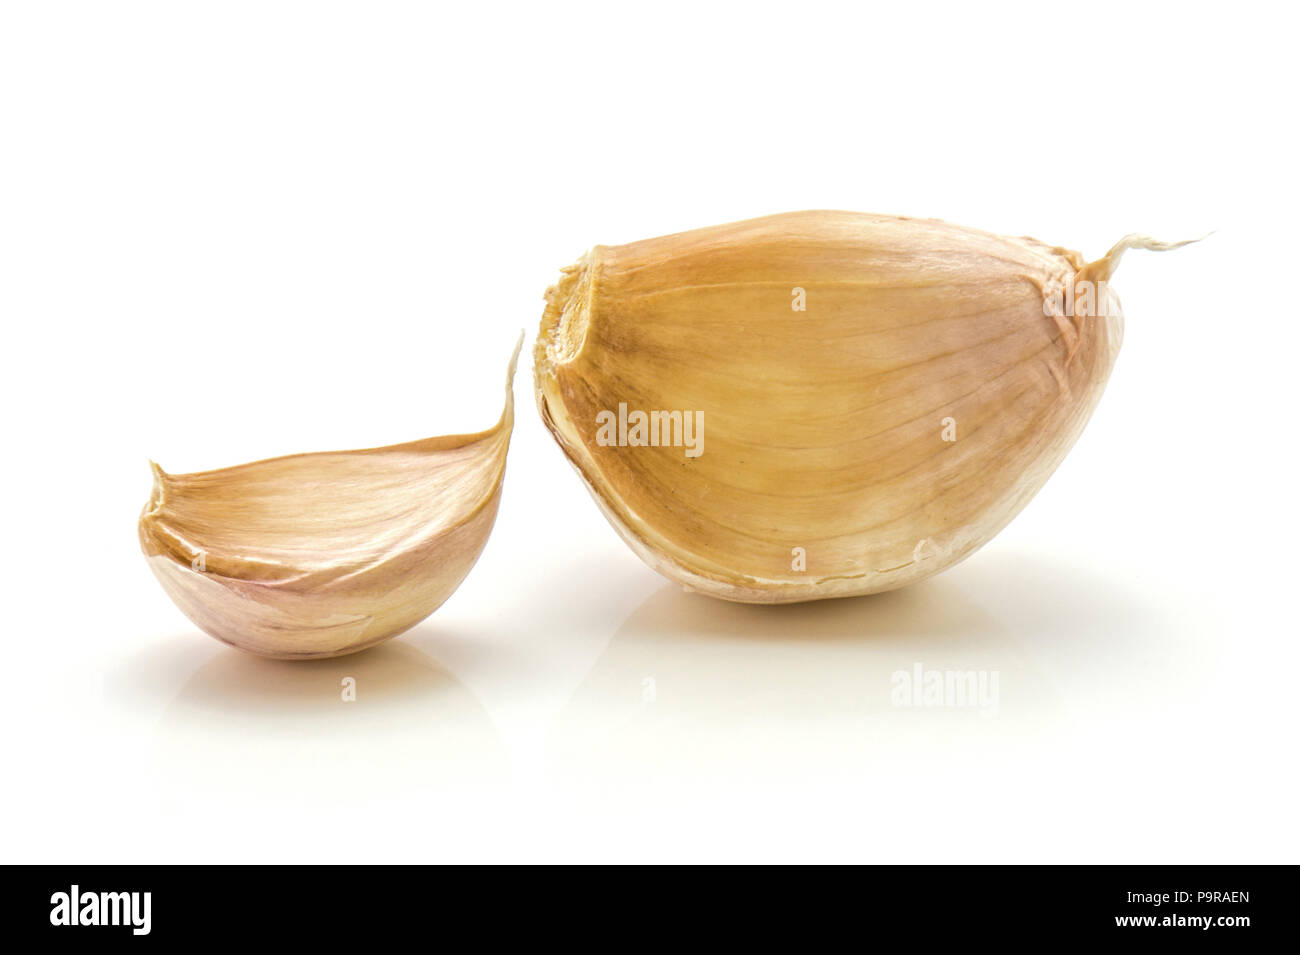 Two garlic cloves isolated on white background Stock Photo